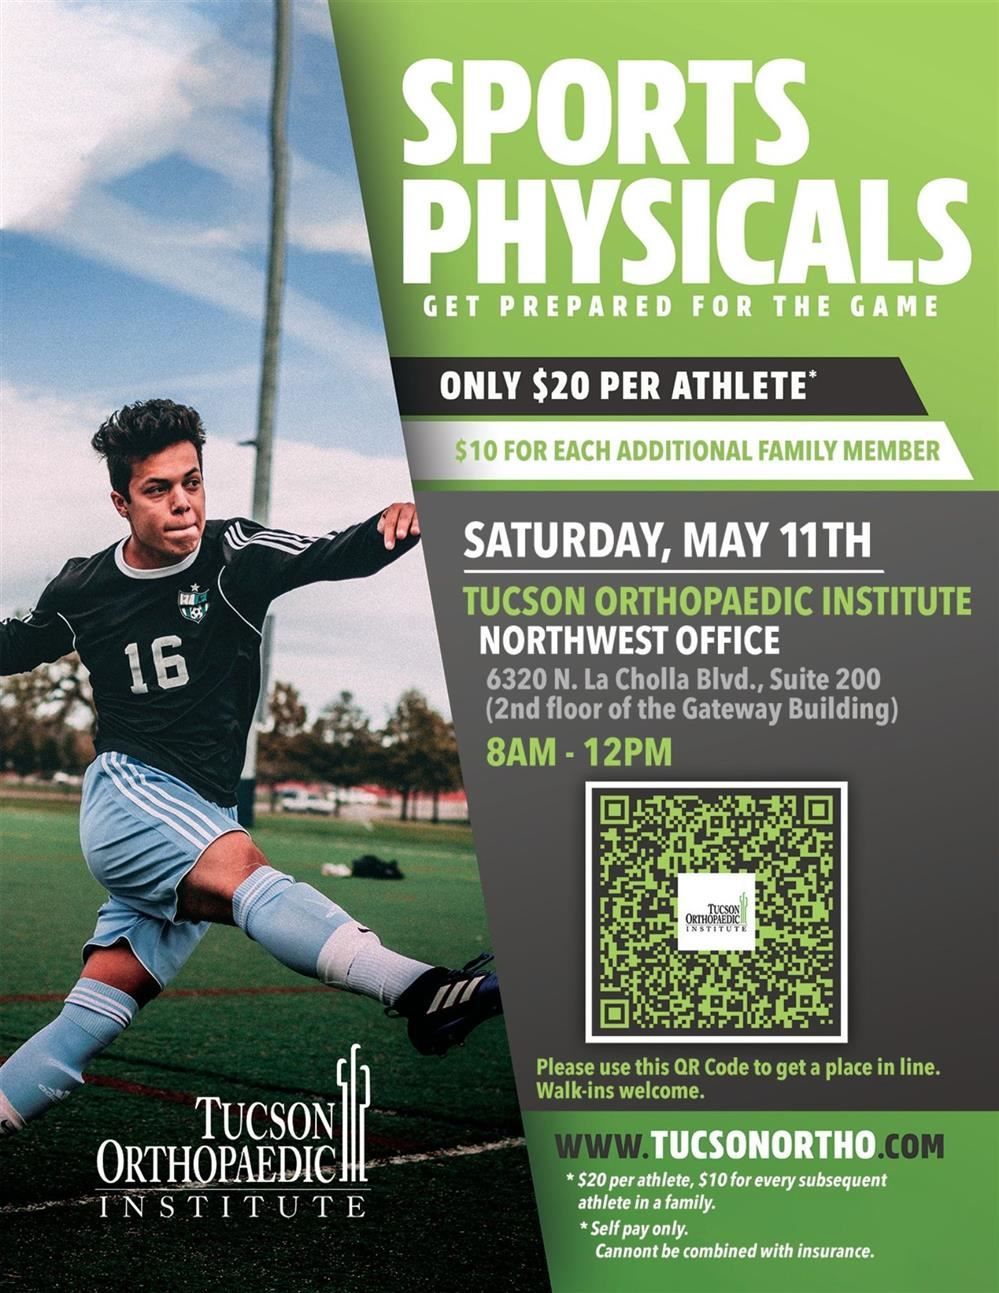 Flier for athletic physical exams